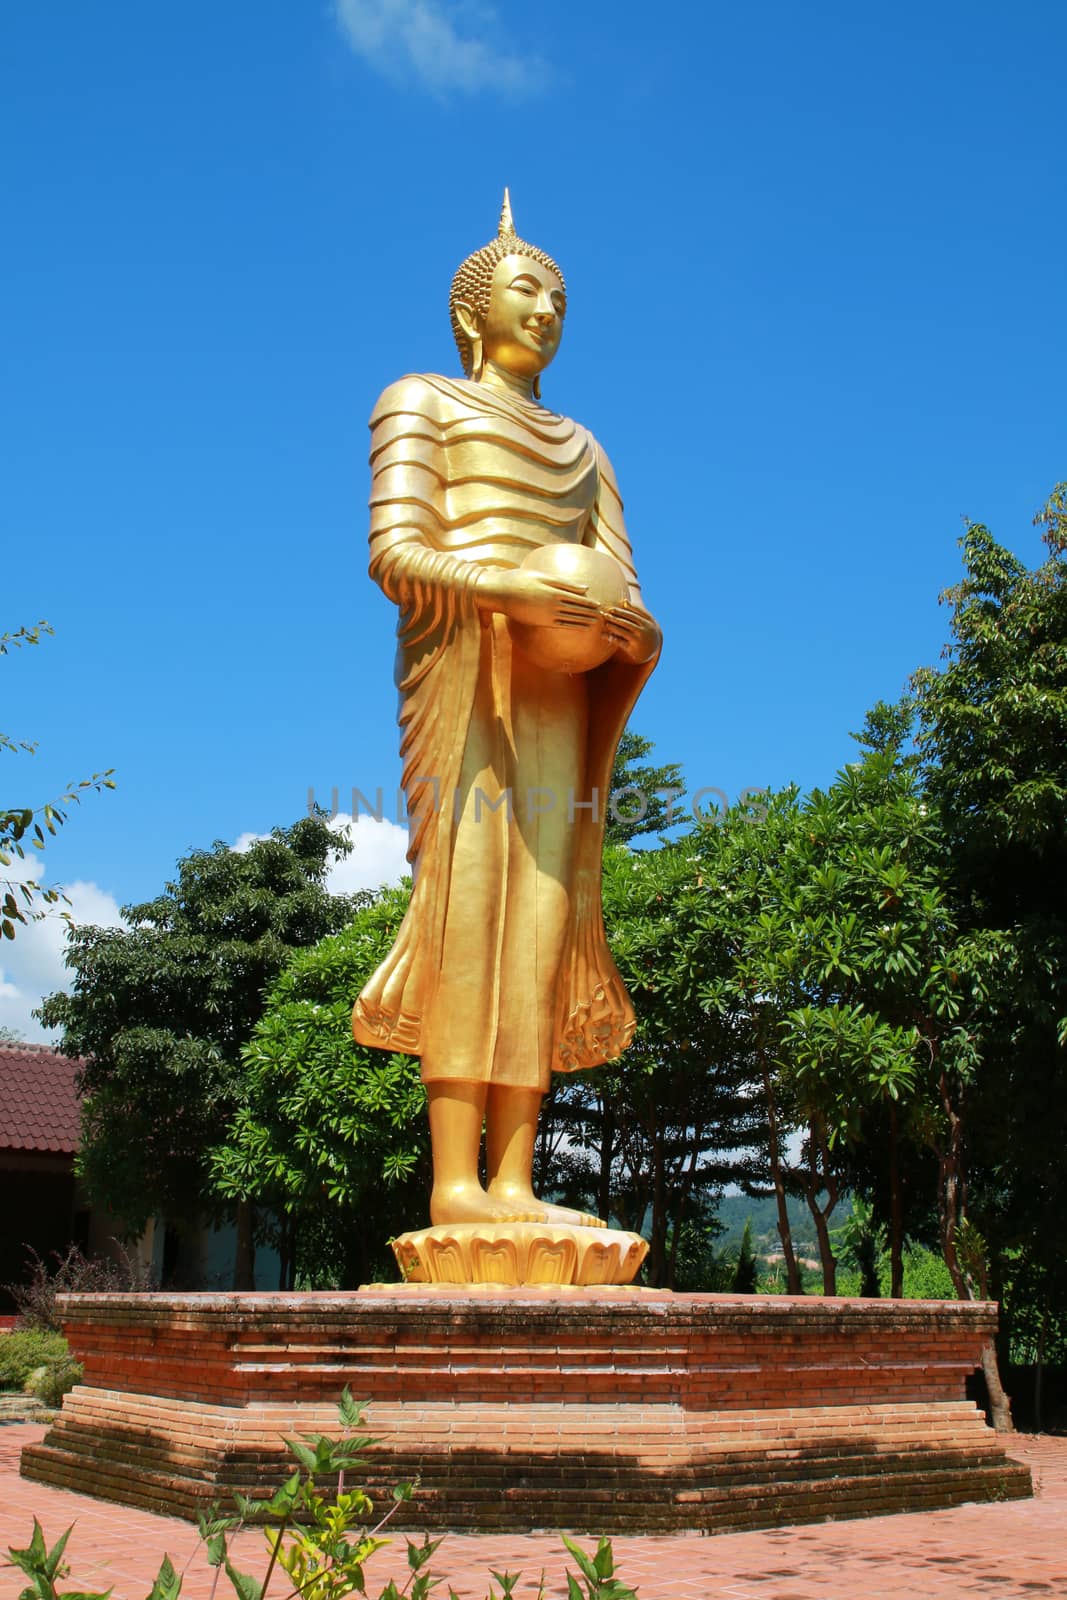 The large buddha image holding an alms bowl in the public temple in Thailand.